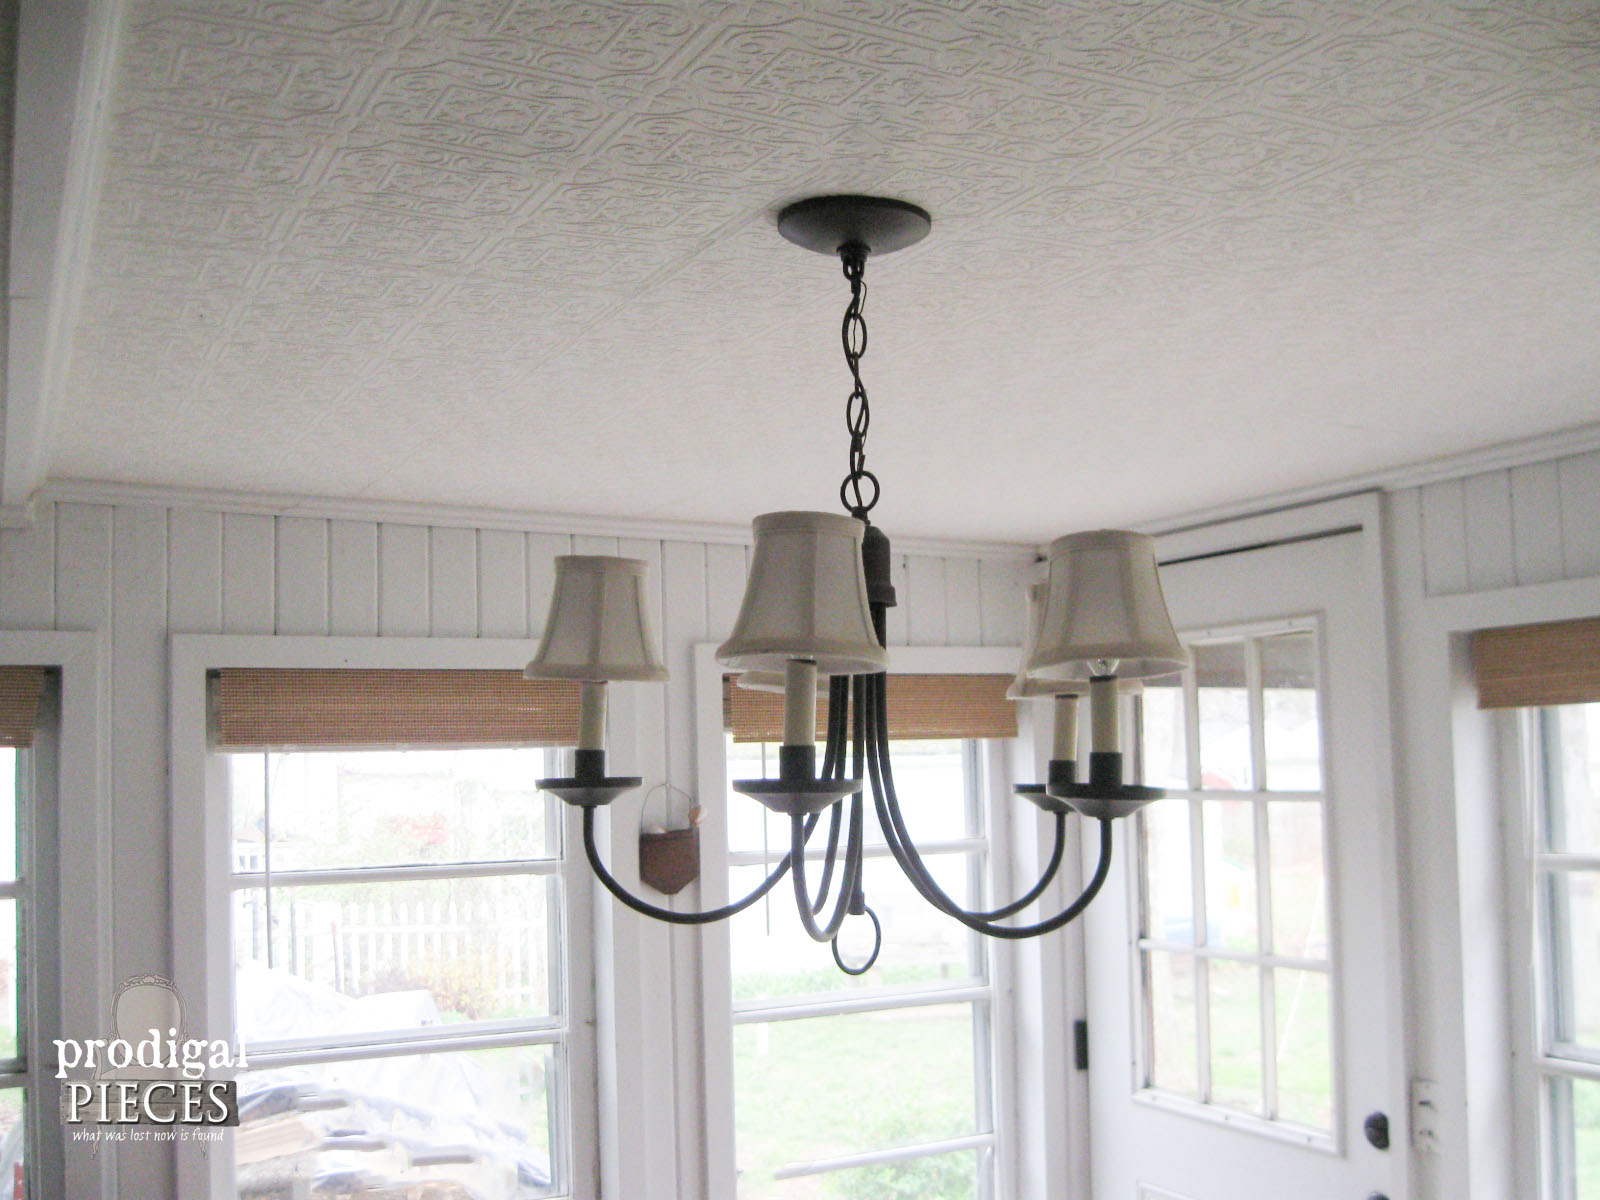 Dining Area Chandelier Before Kitchen Remodel | Prodigal Pieces | www.prodigalpieces.com